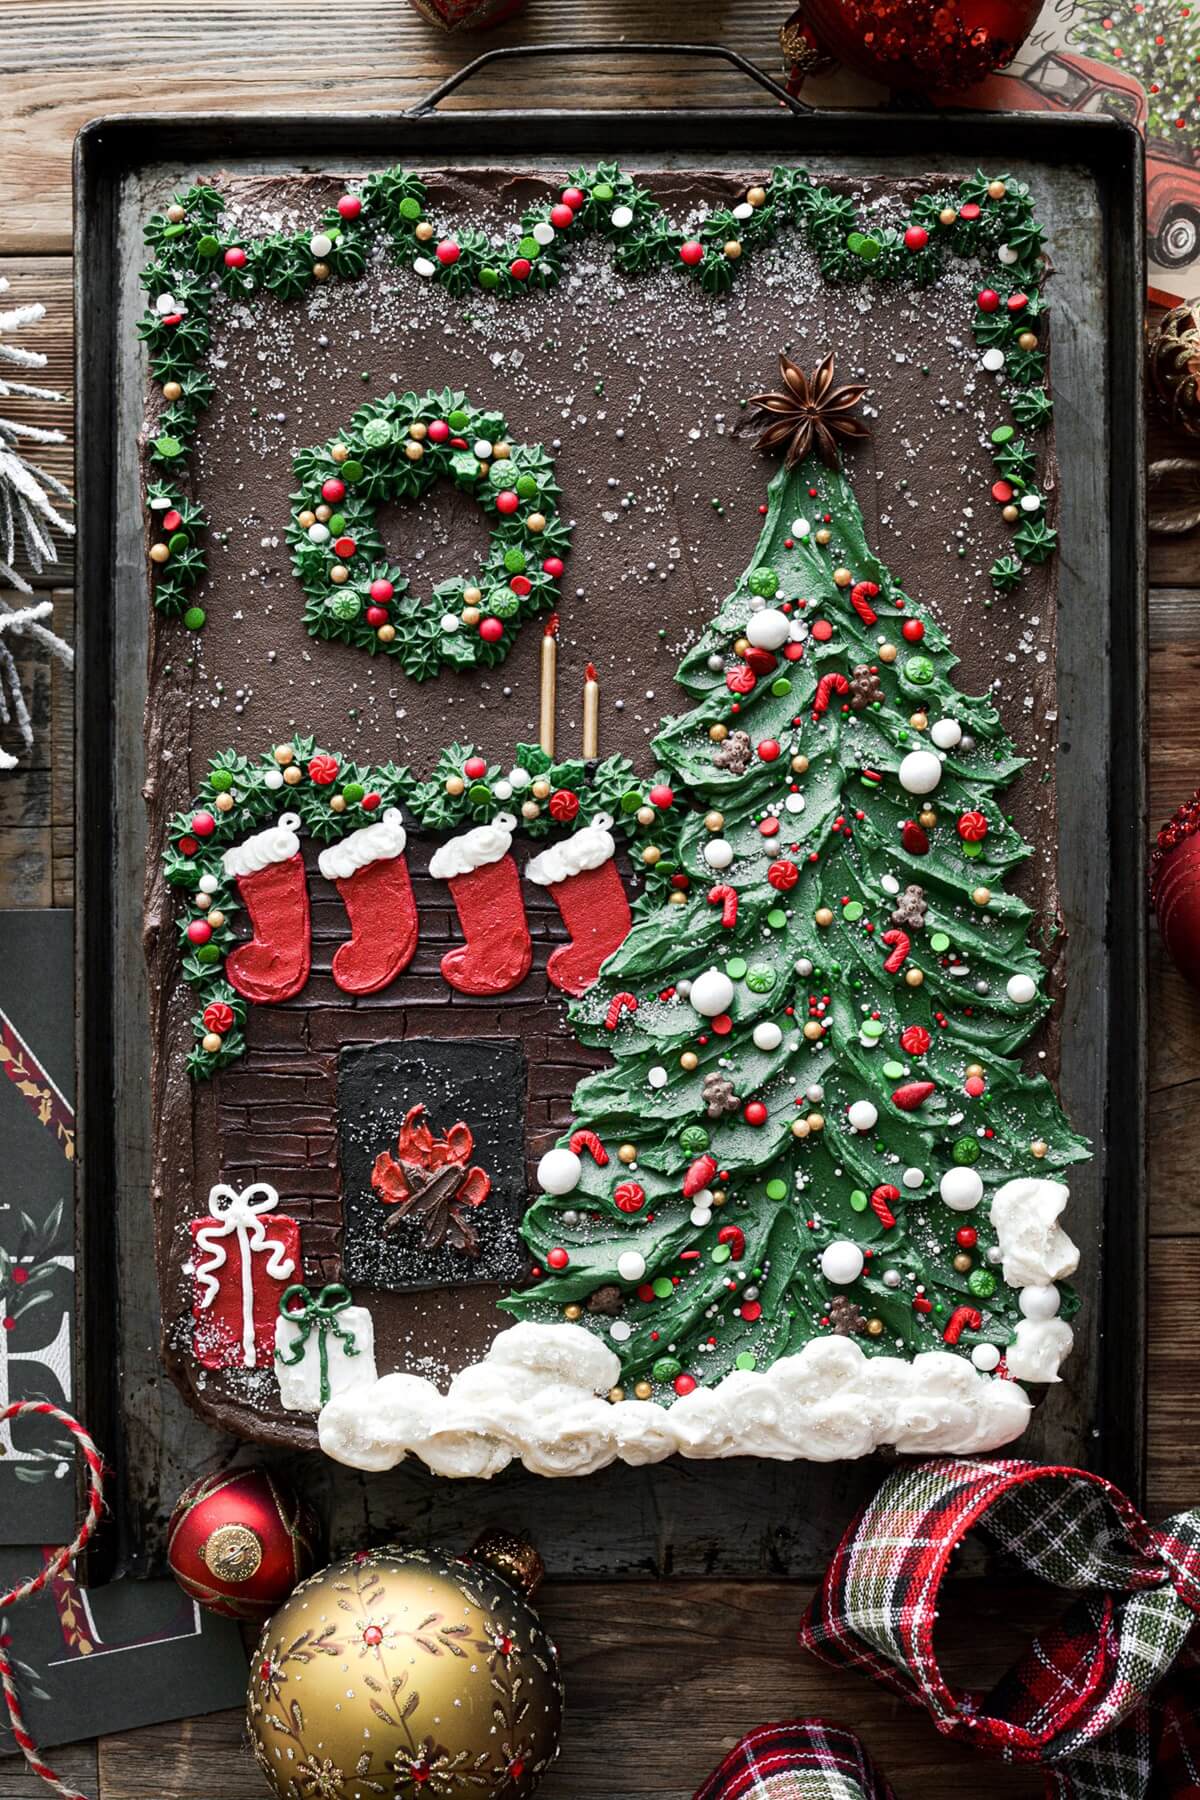 Christmas tree sheet cake with a fireplace, stockings, wreath and garland.